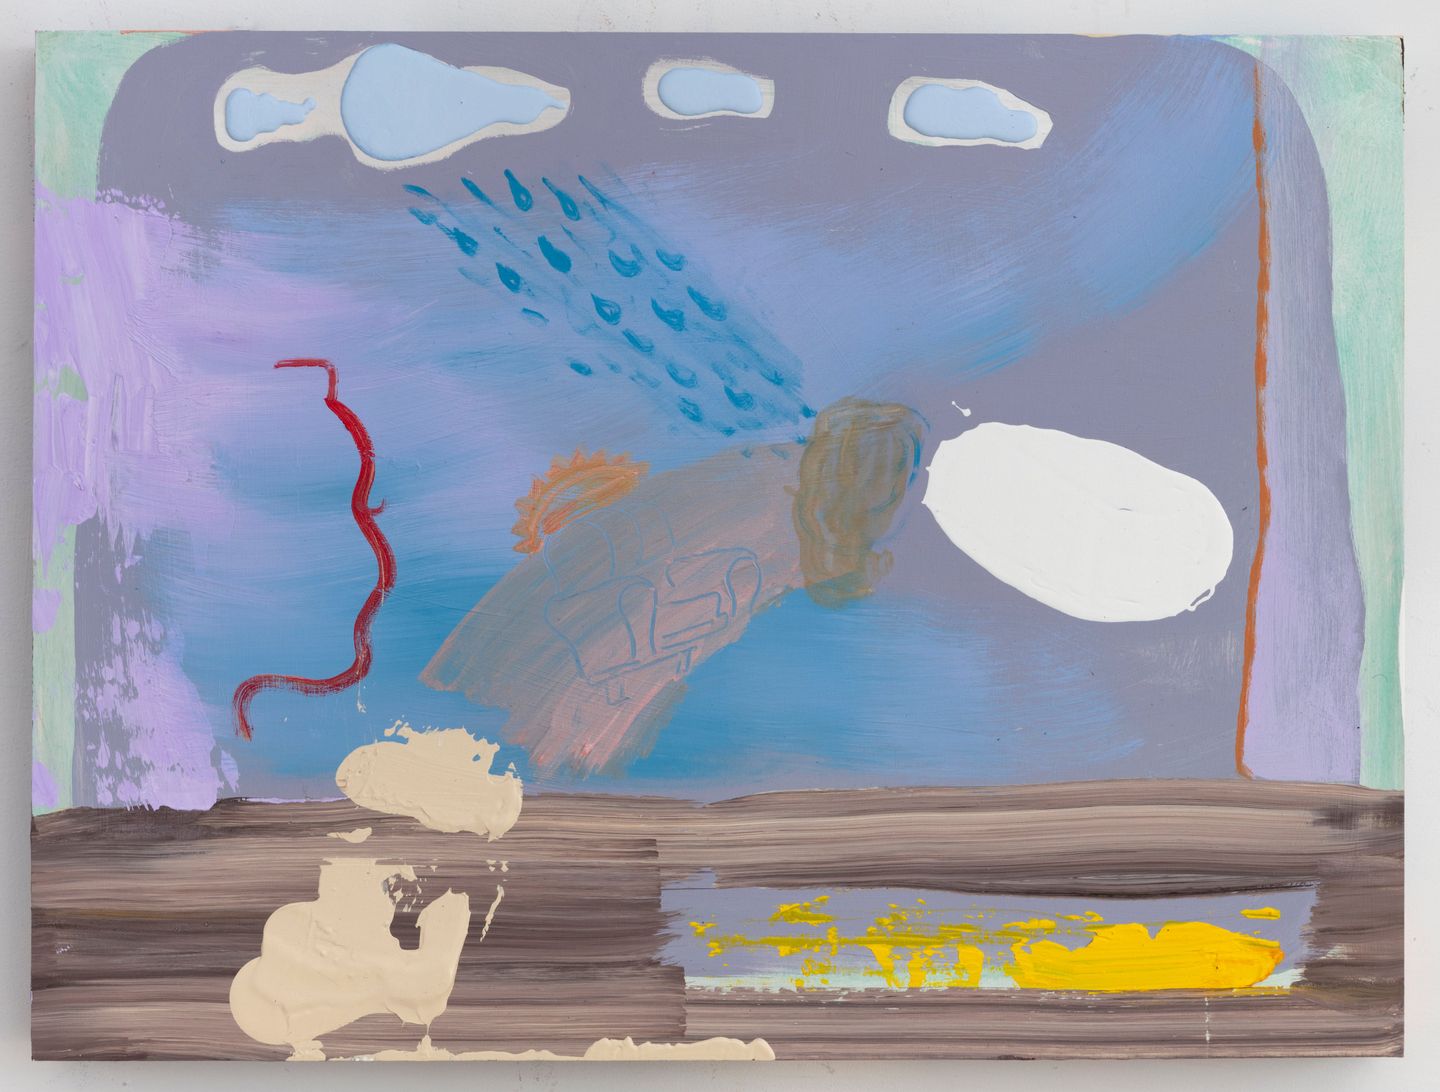 Walter Price, Hold the umbrella tight while viewing my rain (2020). Acrylic, gesso, and super white on wood. 45.9 x 61.1 x 5.1cm. Courtesy the artist, The Modern Institute/Toby Webster Ltd., Glasgow and Greene Naftali, New York.